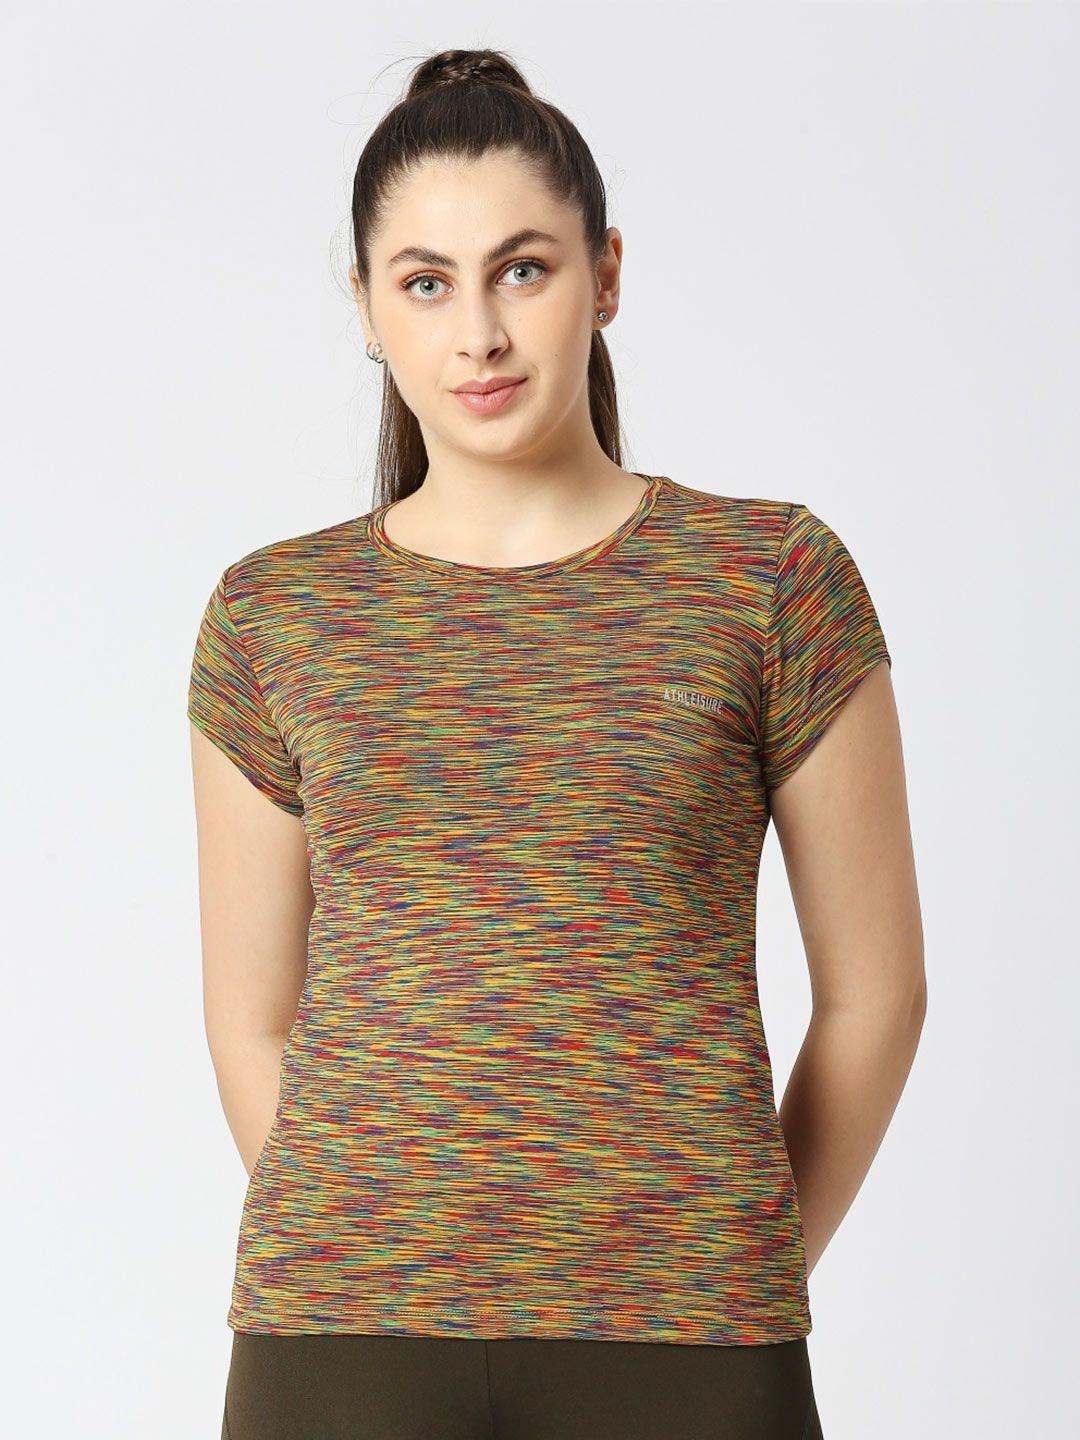 lovable sport abstract printed round neck regular top